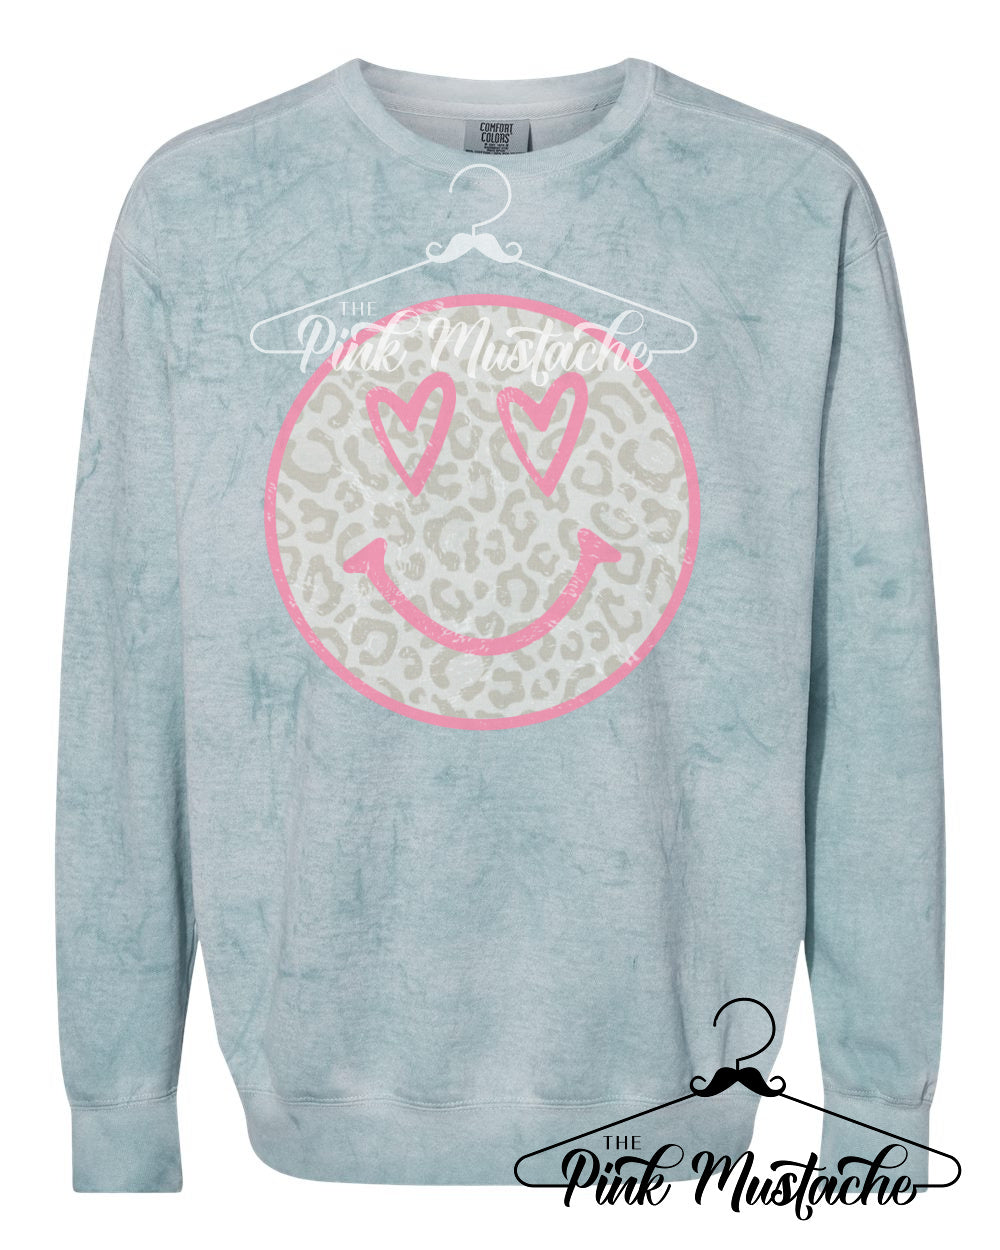 Comfort Colors Colorblast Leopard Smiley Heart Sweatshirt - Sizes and Inventory Limited